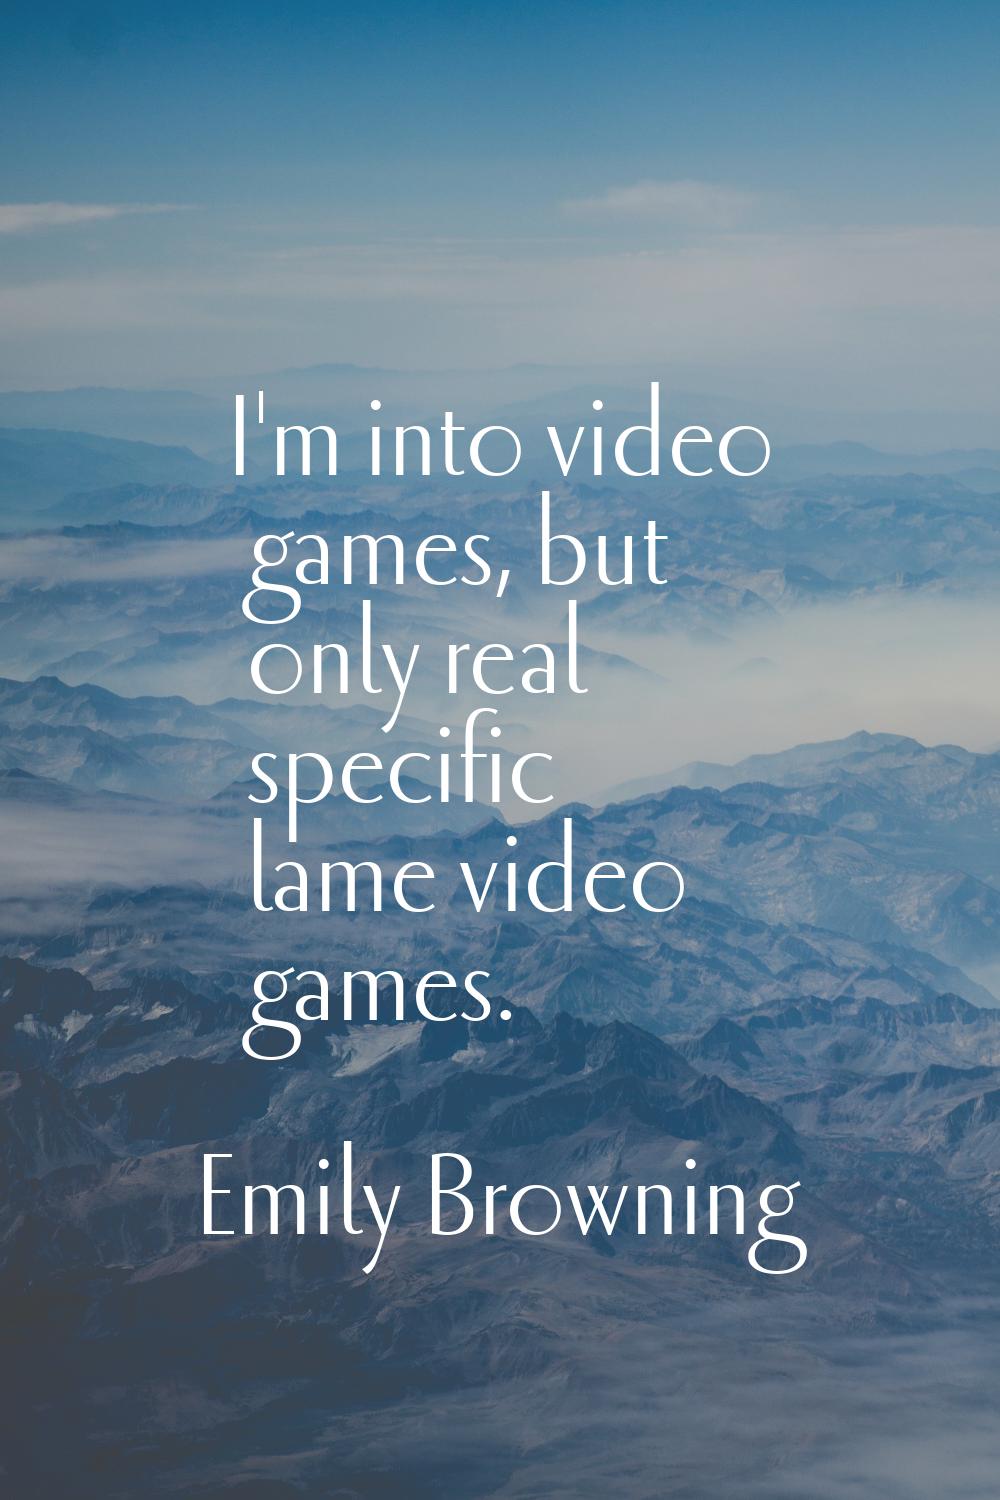 I'm into video games, but only real specific lame video games.